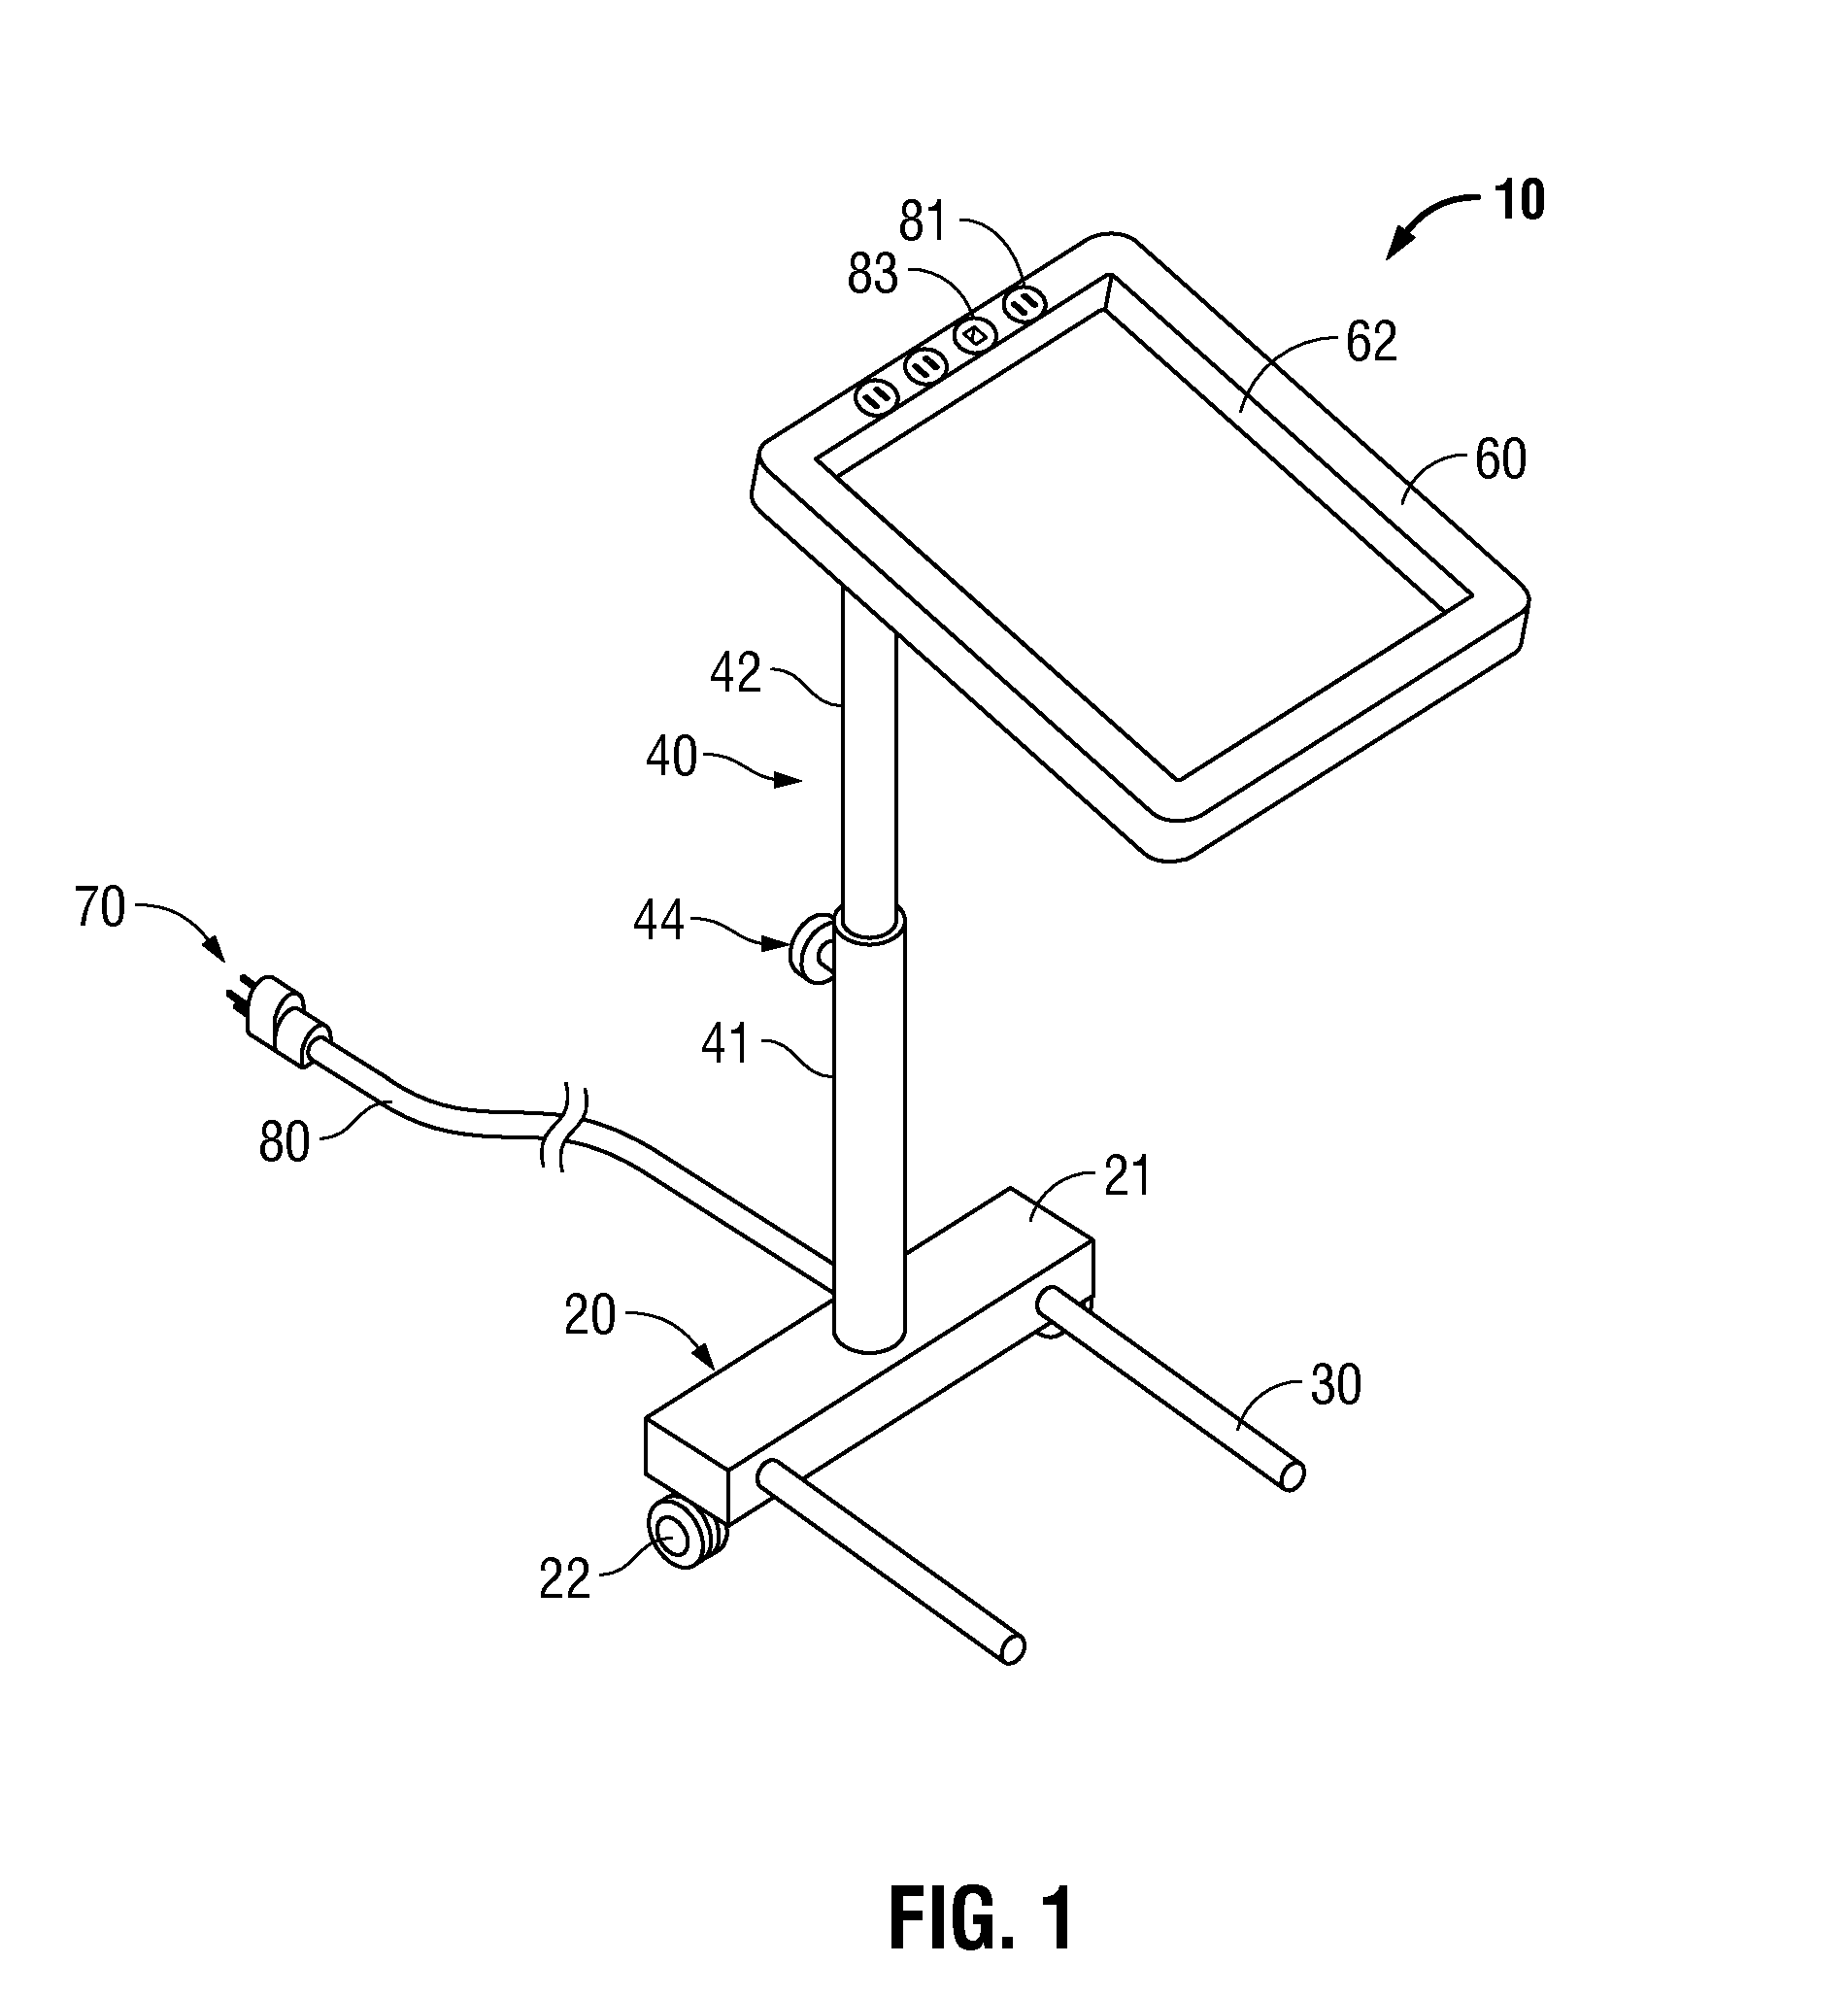 Surgical tray assemblies for storing, charging, powering, and/or communicating with surgical instruments